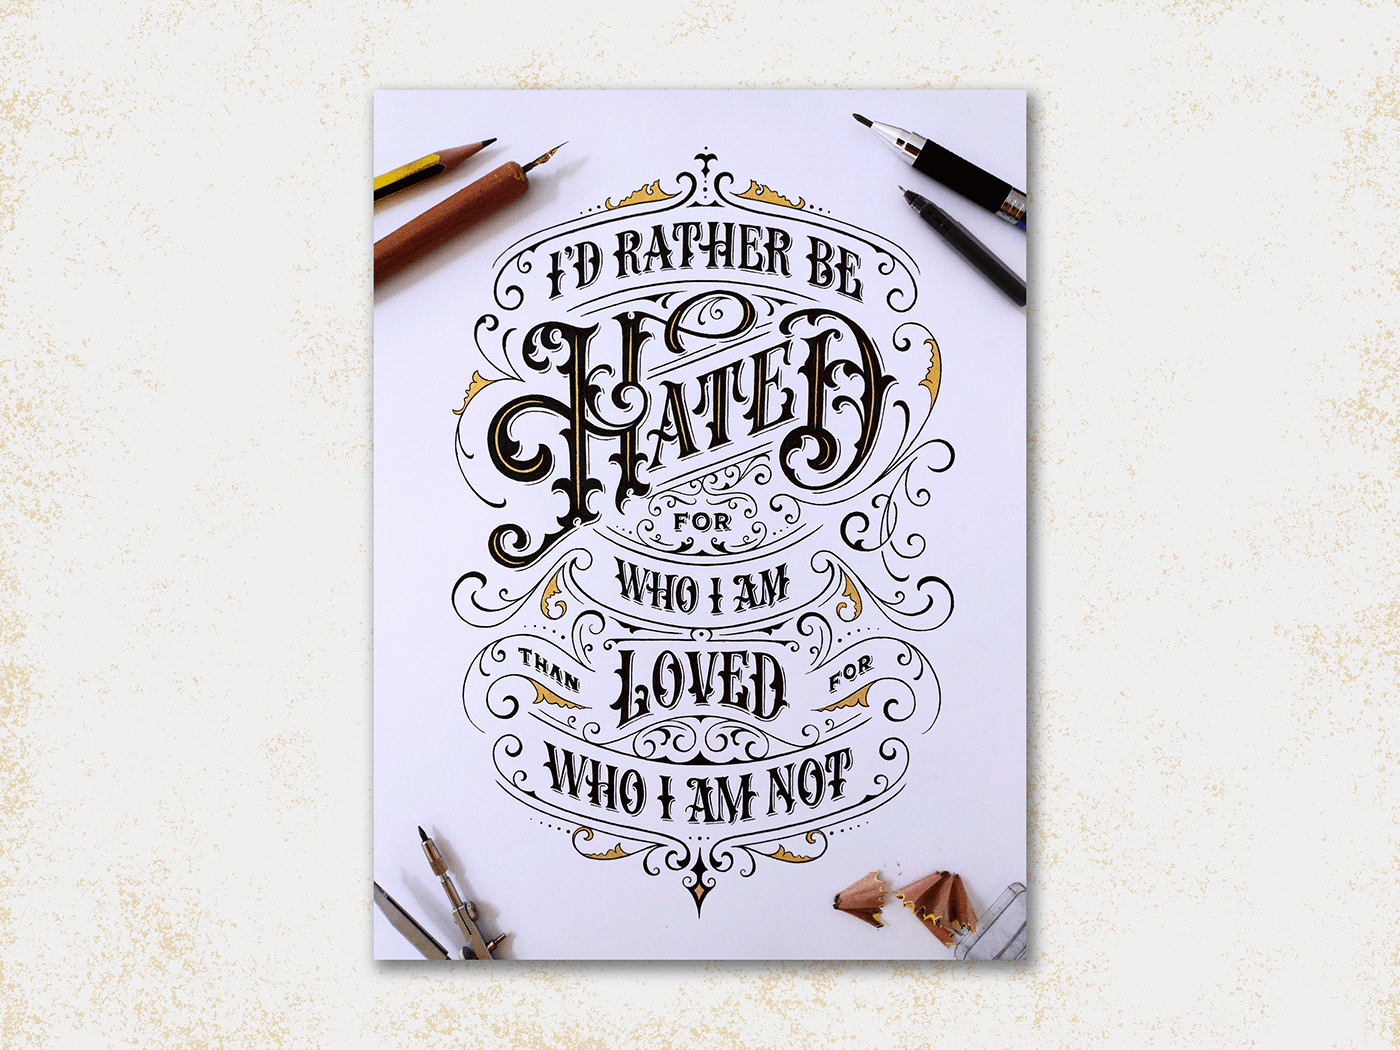 LETTERING vol.4 - Hand-drawn Lettering (part.02) by Andee Nguyen